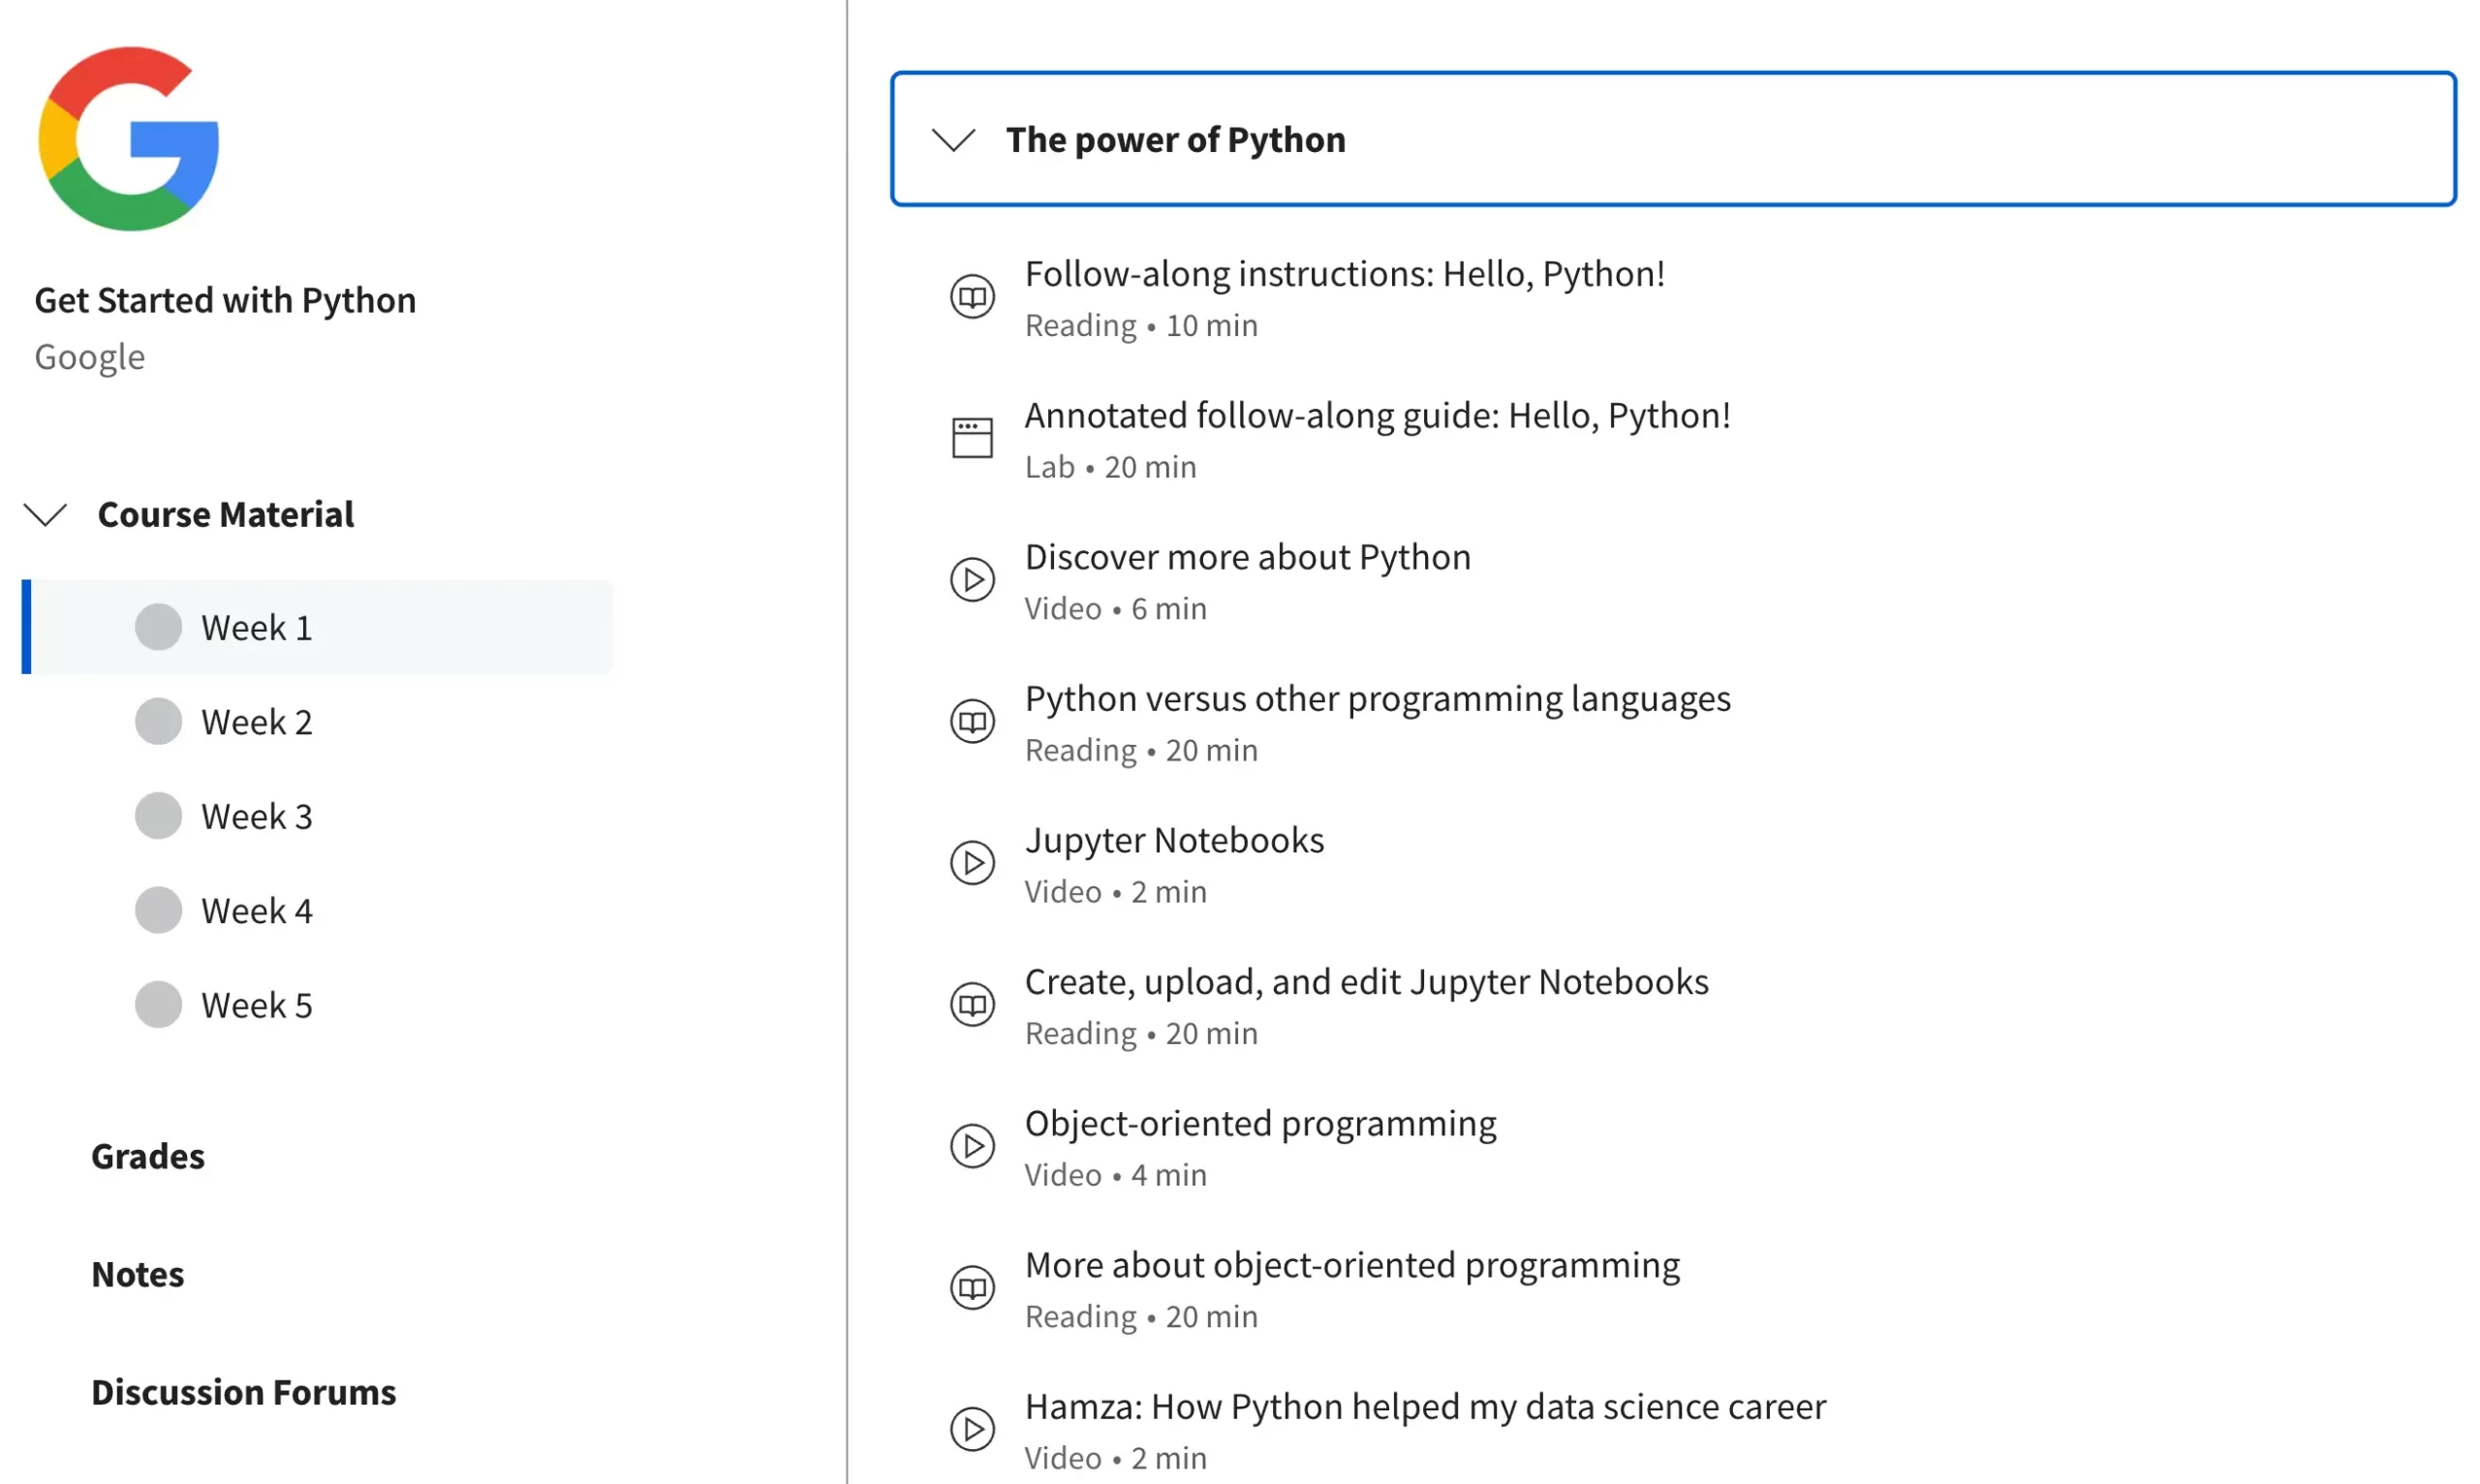 Get Started With Python Course